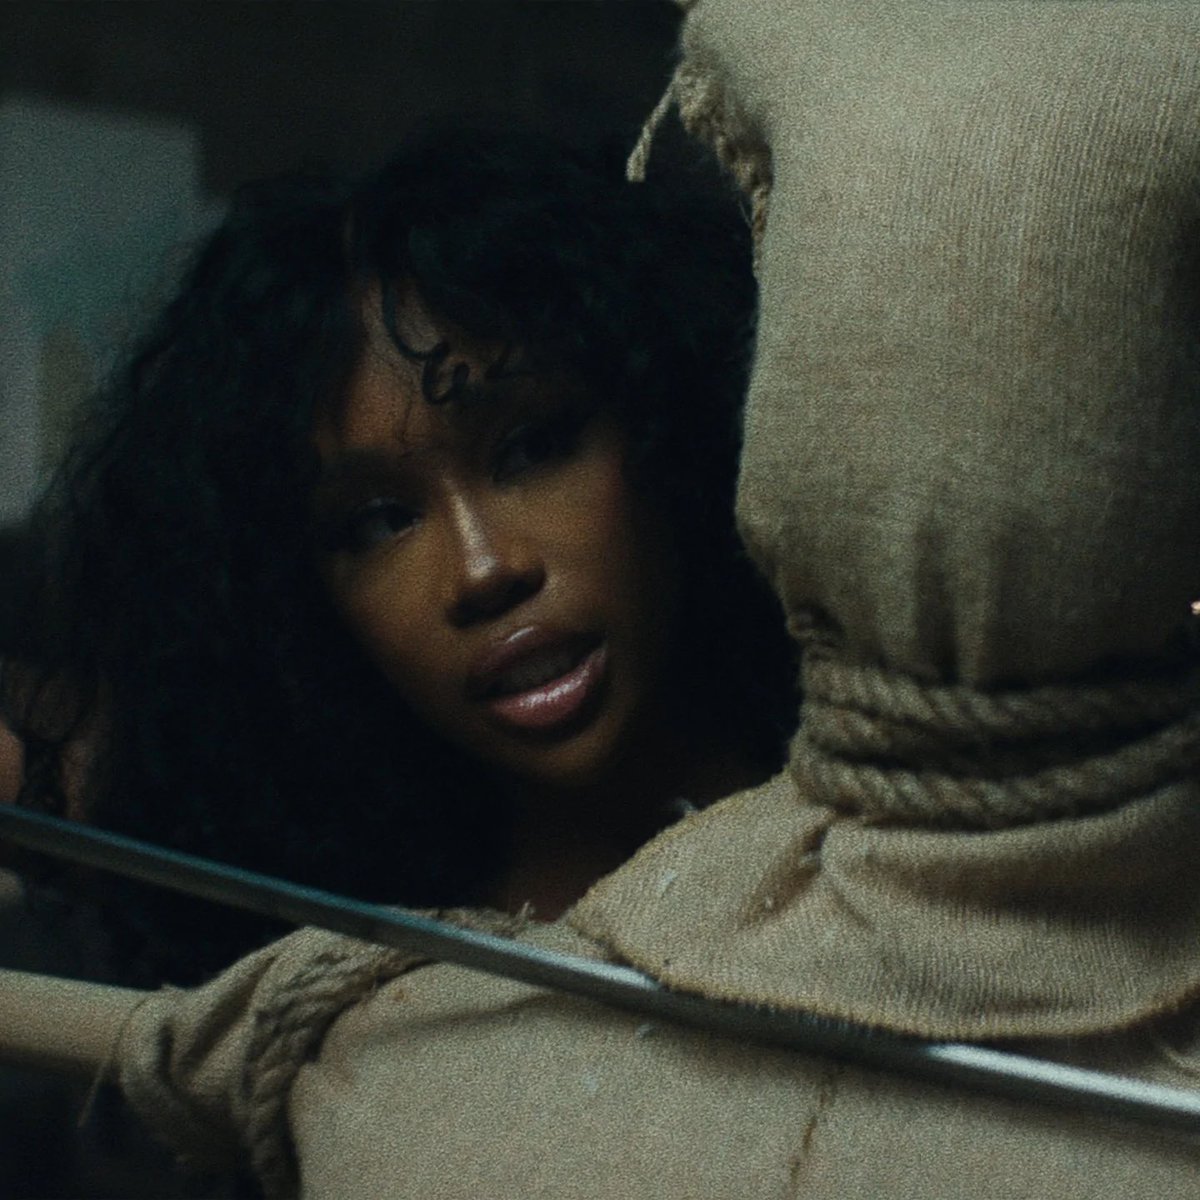 ‘Kill Bill‘ by SZA reaches a new daily high in streams on Global Spotify of 8.19 million.